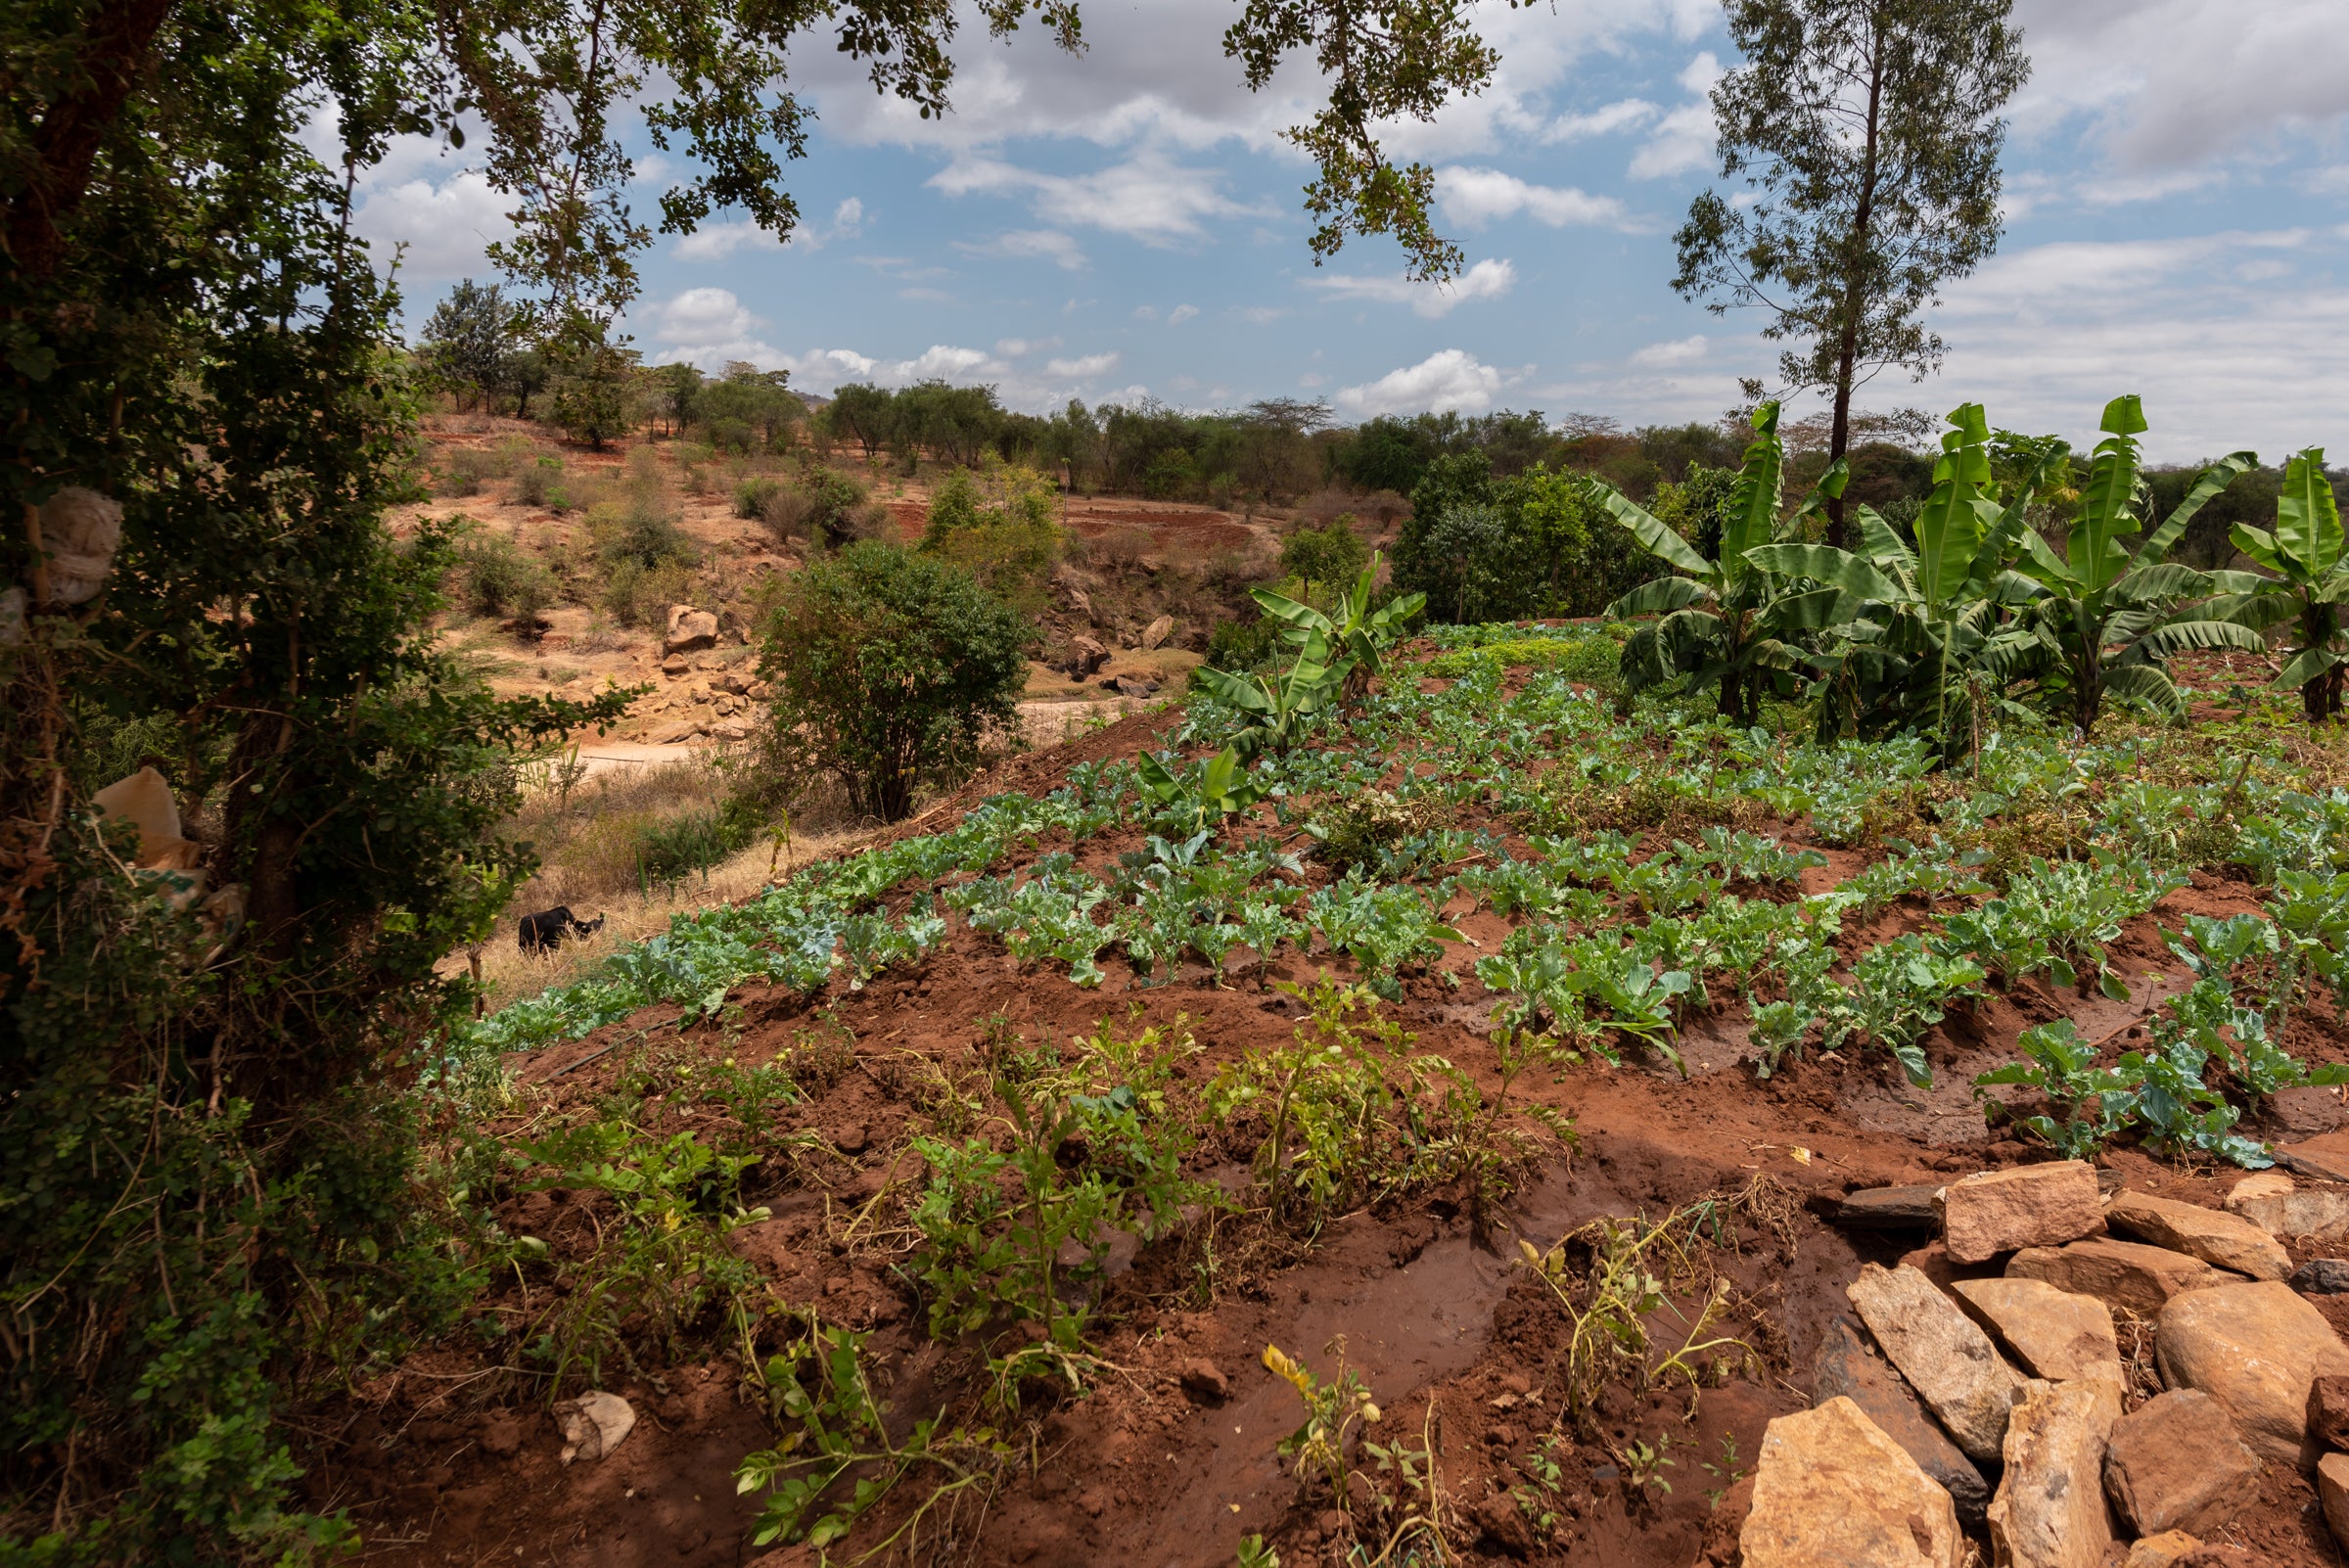 Climate change challenges the food security of small-holder farmers in Makueni